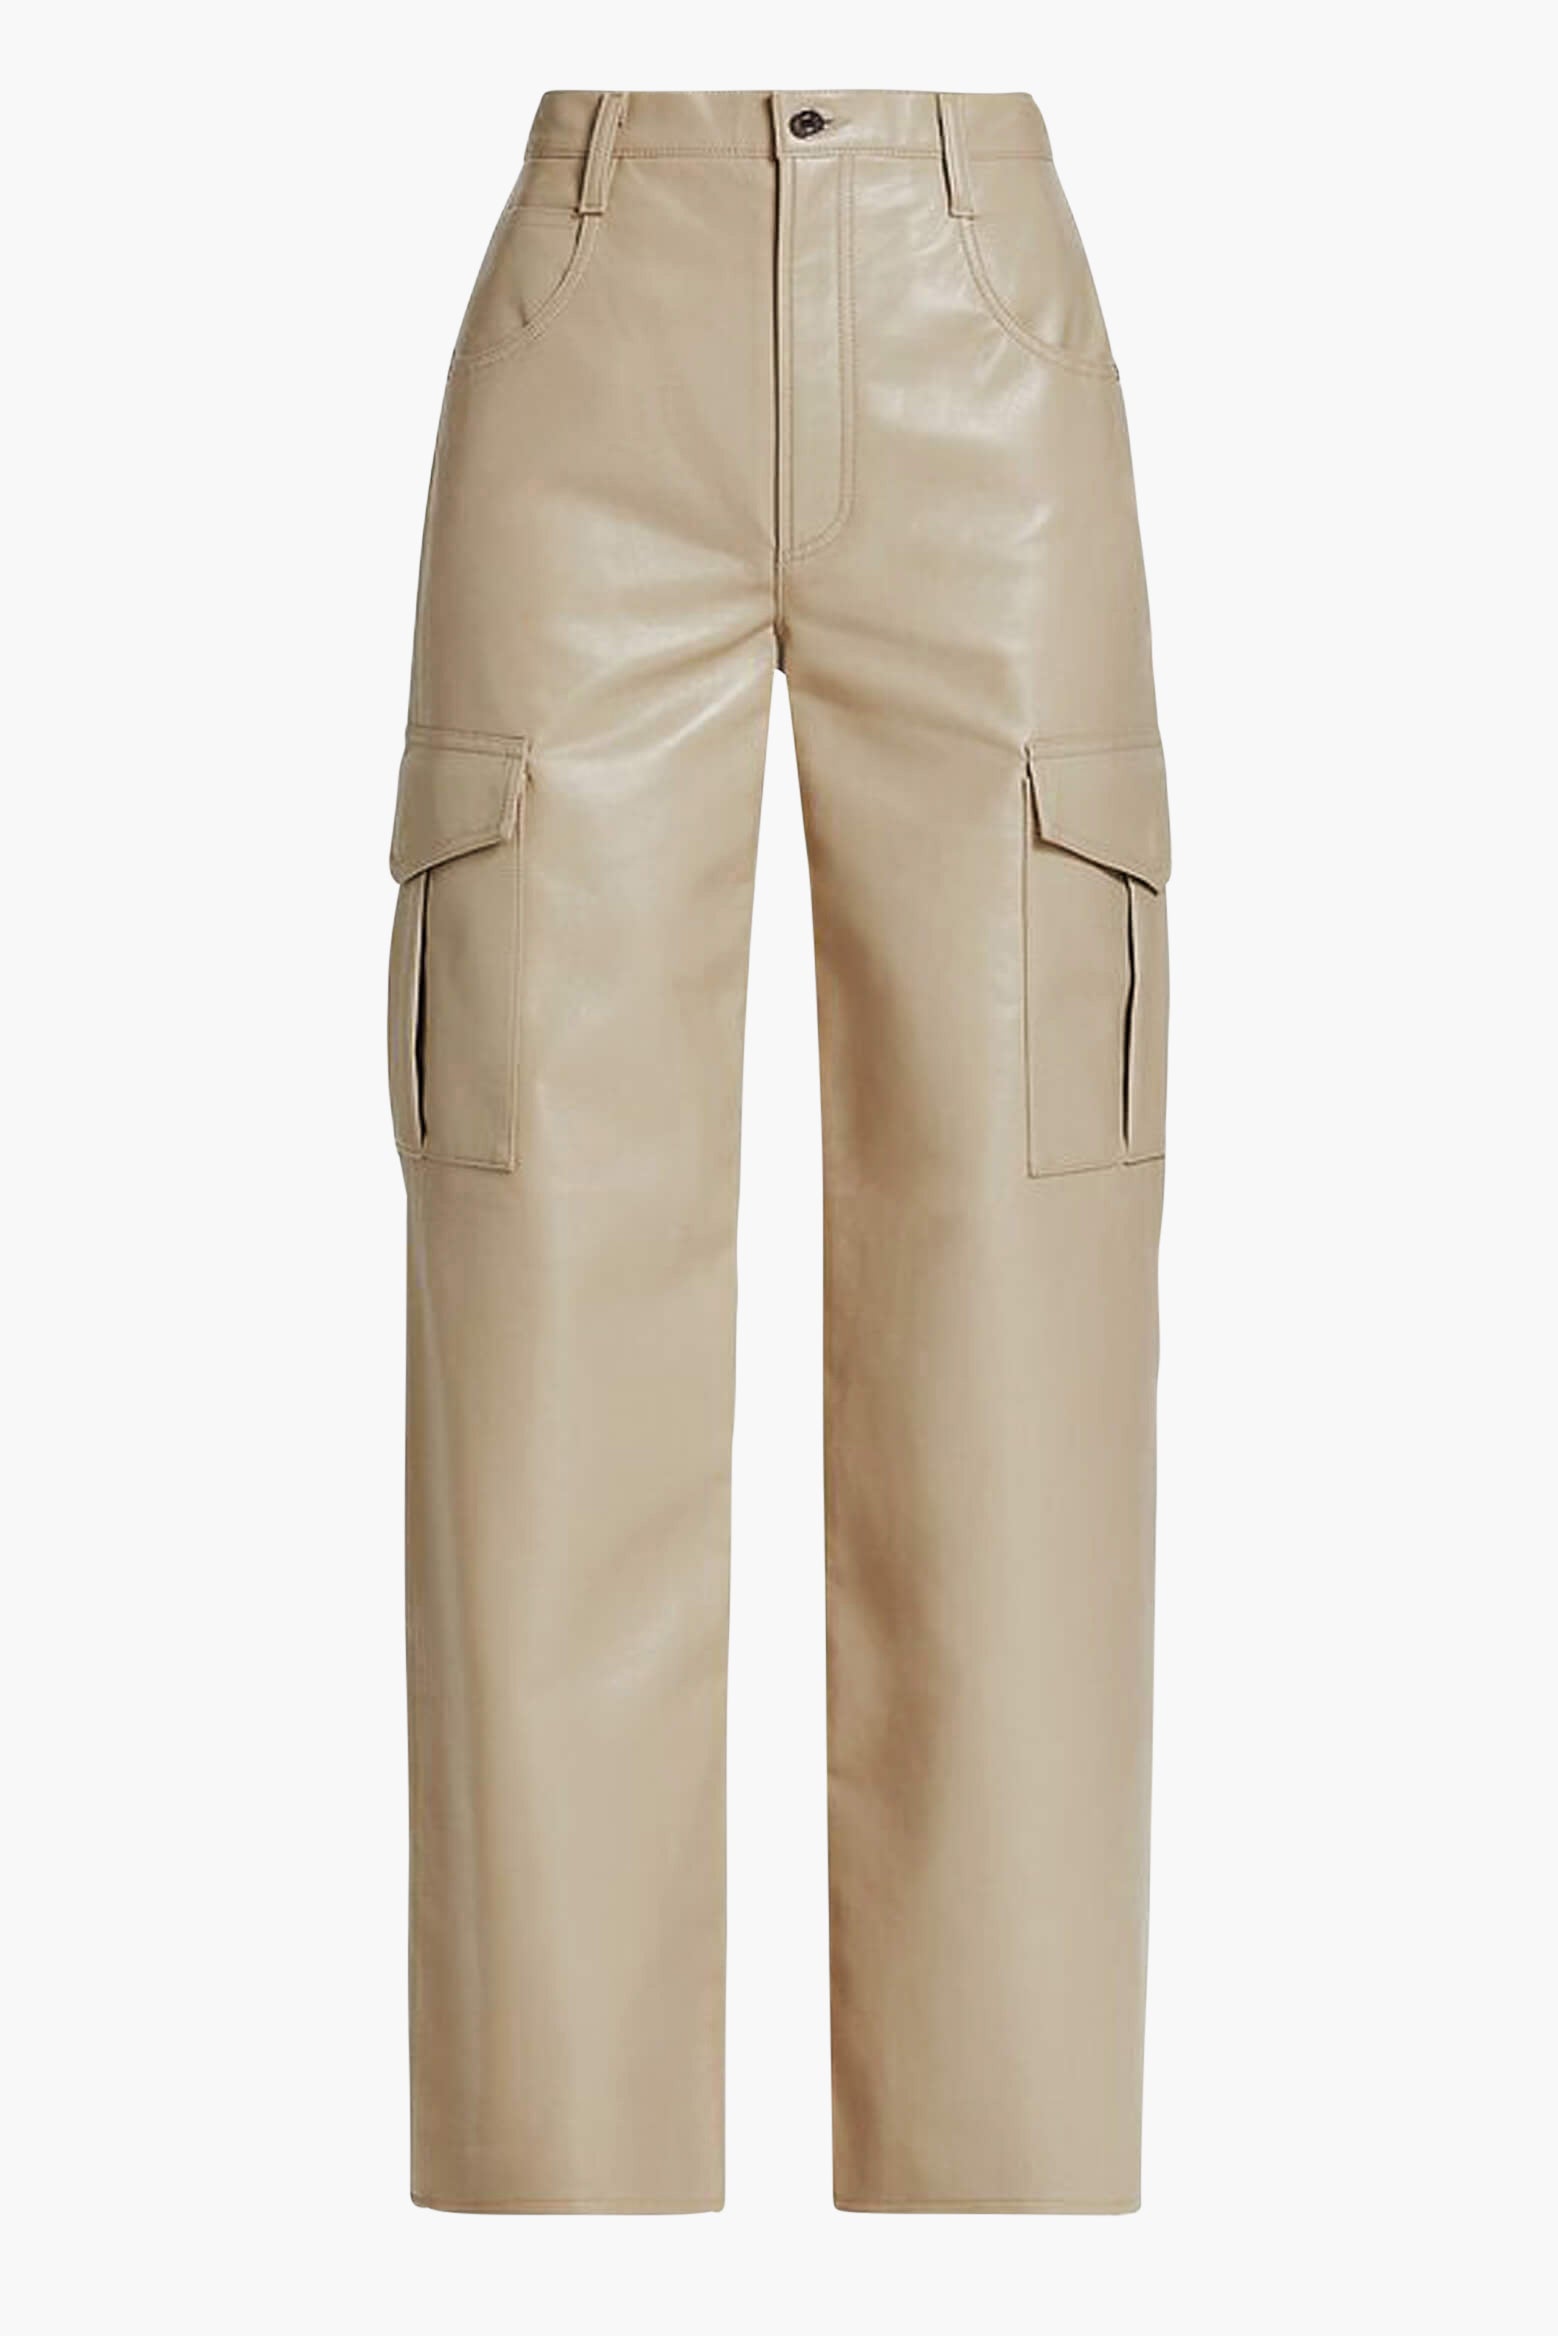 Agolde Recycled Leather Minka Cargo Pant in Toast from The New Trend